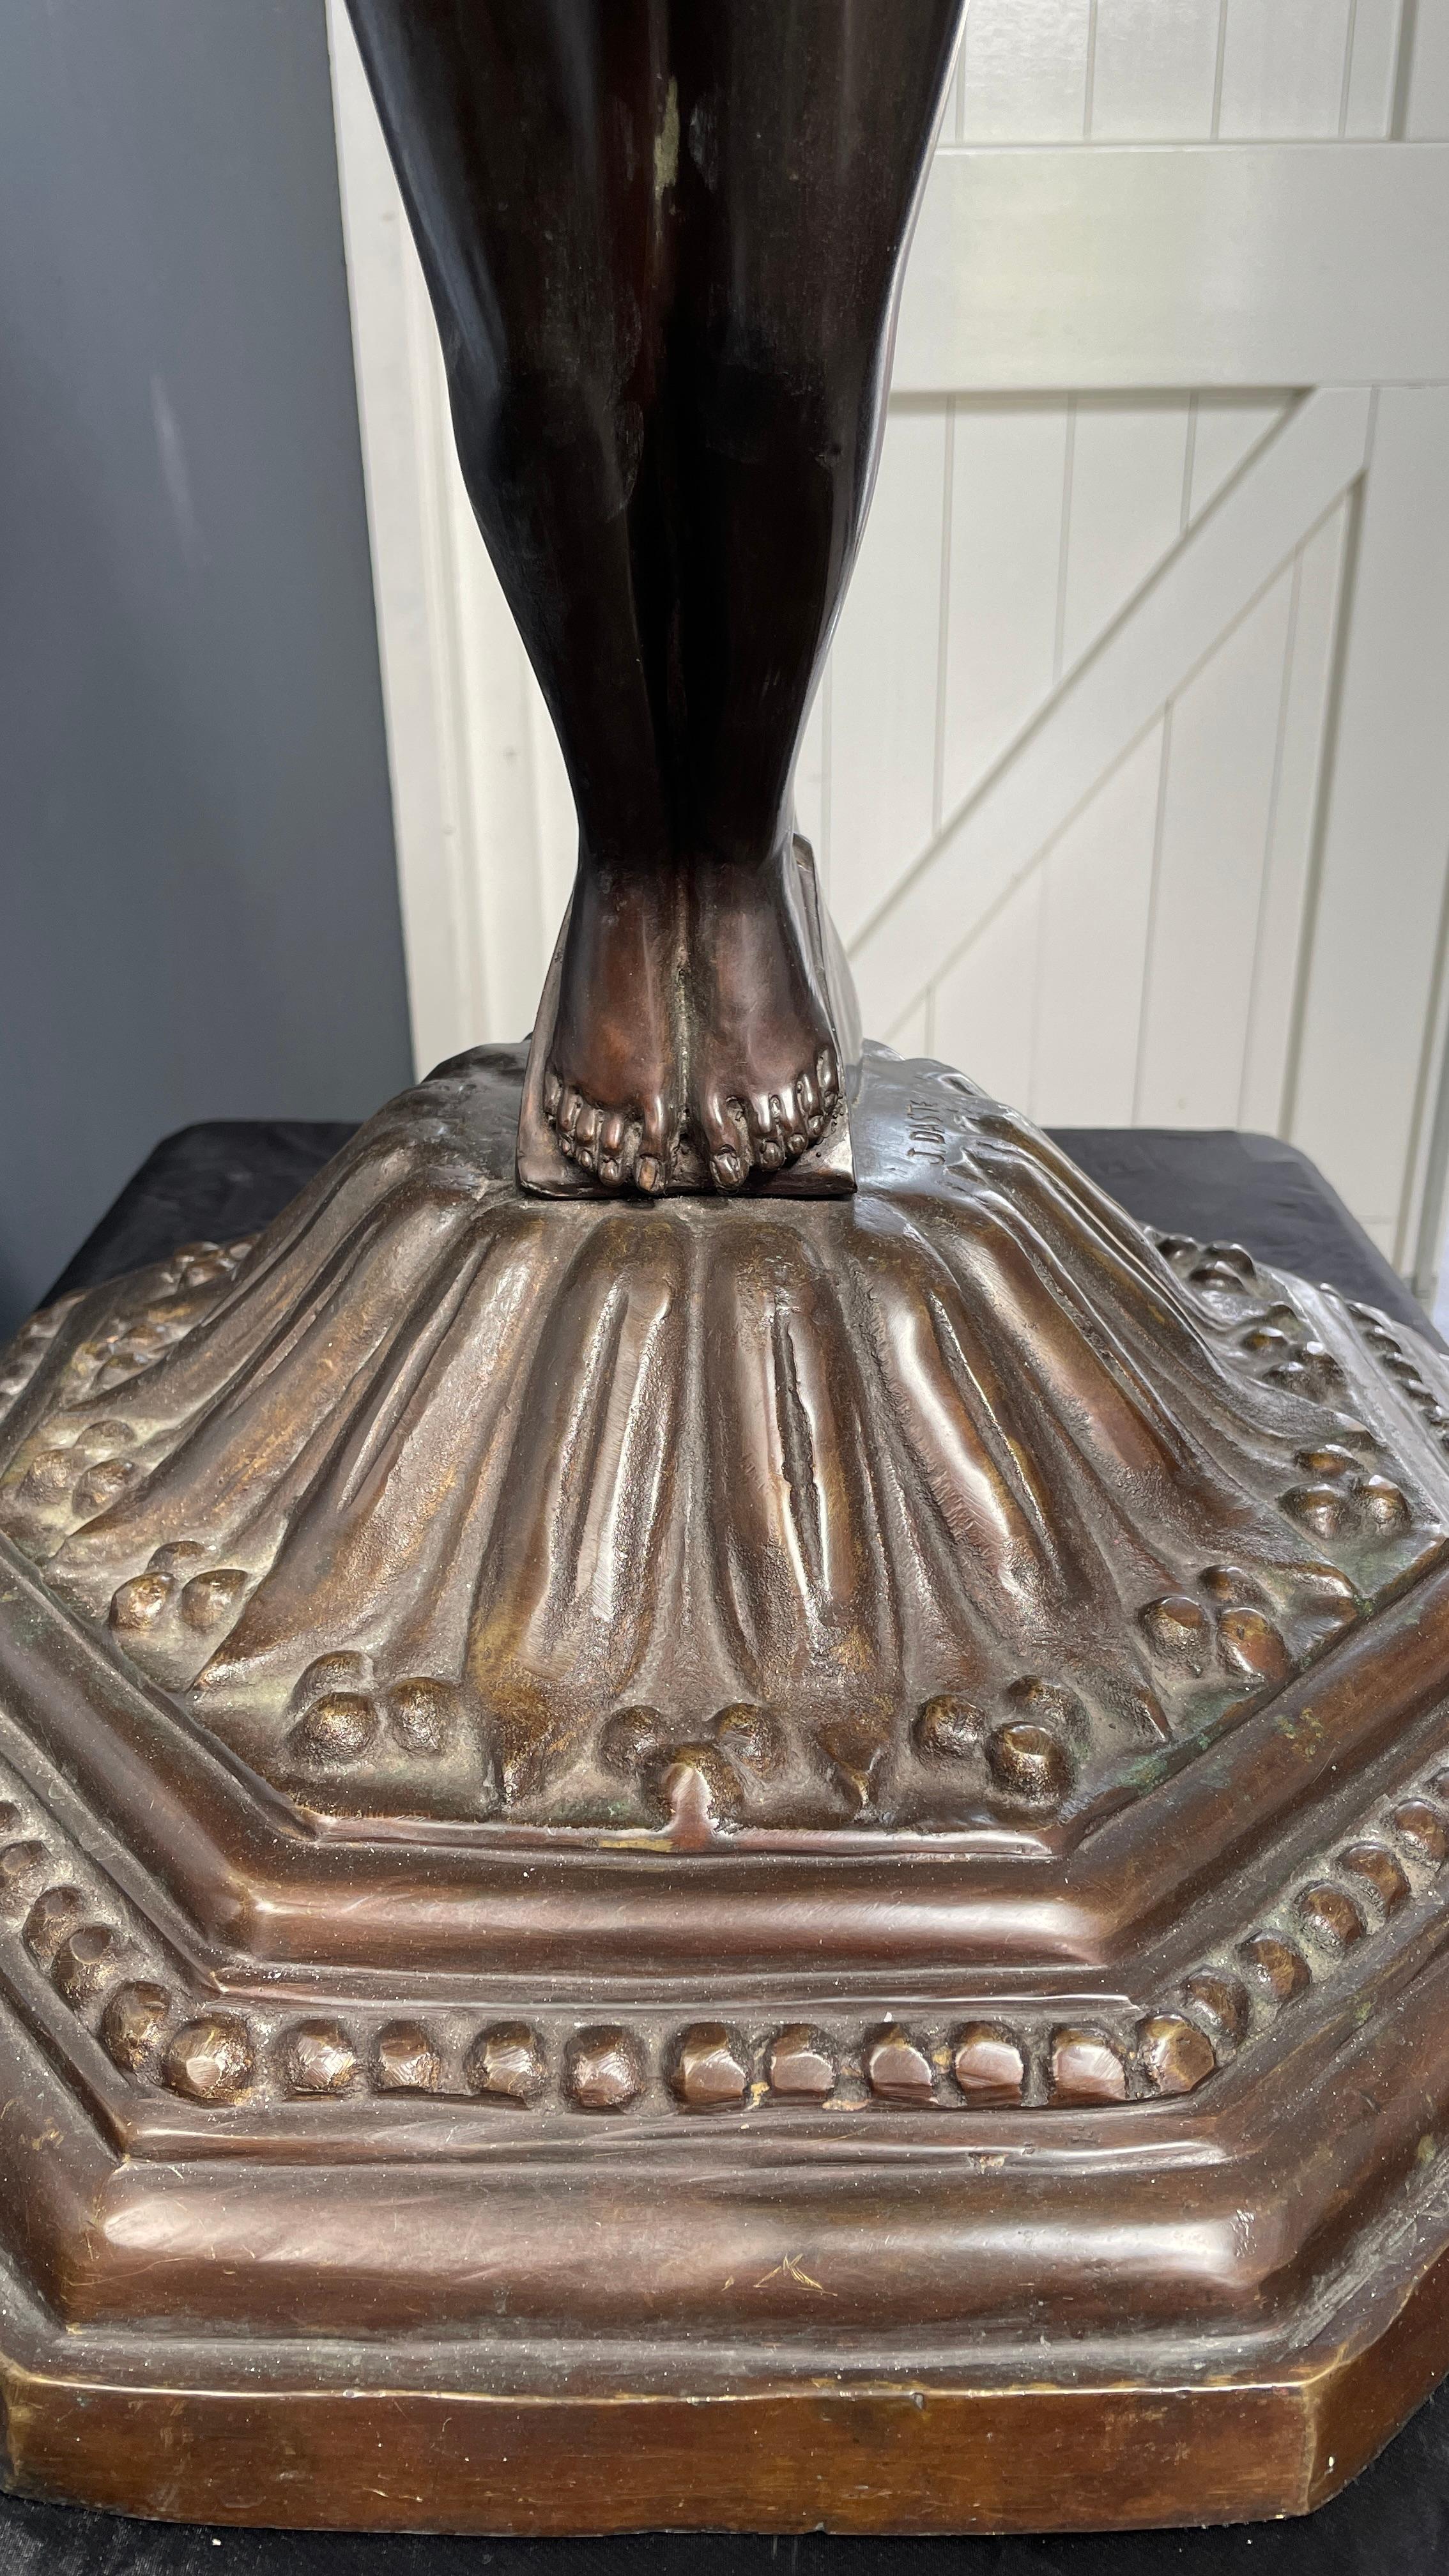 French Bronze Sculpture Bird Bath by Listed Artist Joseph 'Guiseppe' d'Aste, c. 1920's For Sale